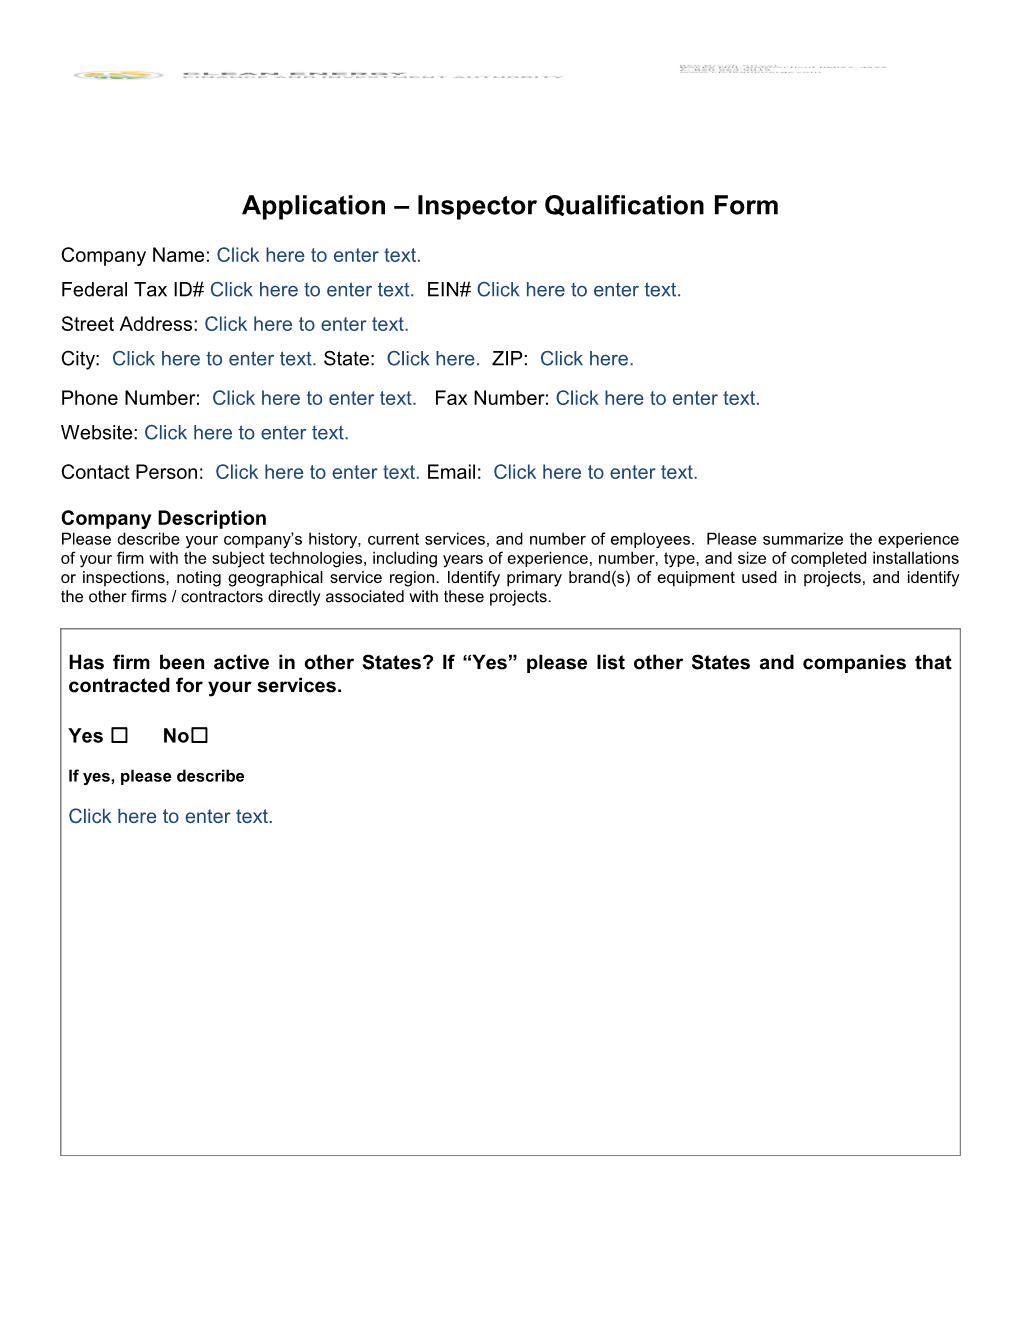 Application Inspector Qualification Form